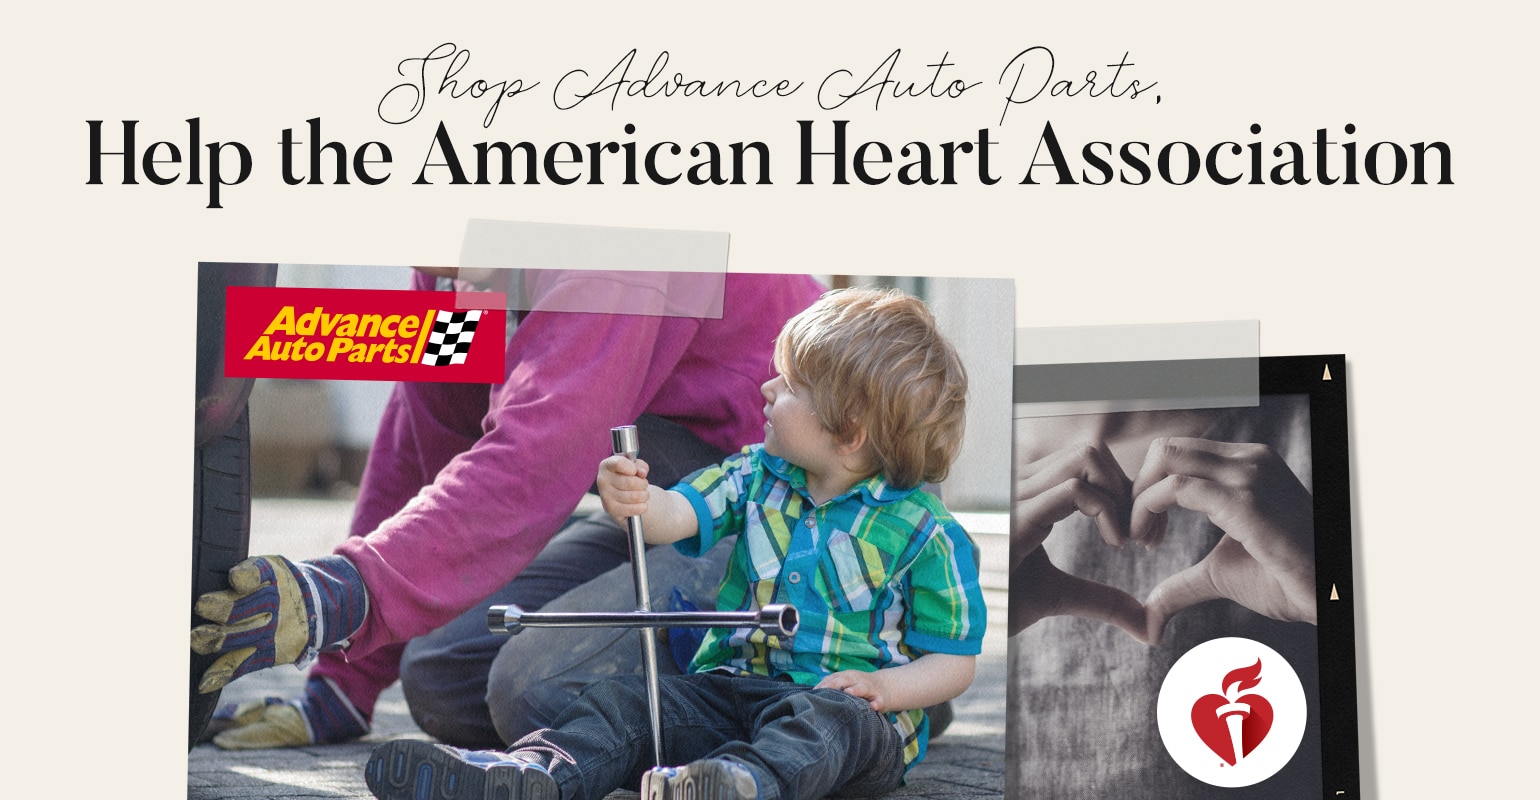 Shop Advance Auto Parts to Help the American Heart Association